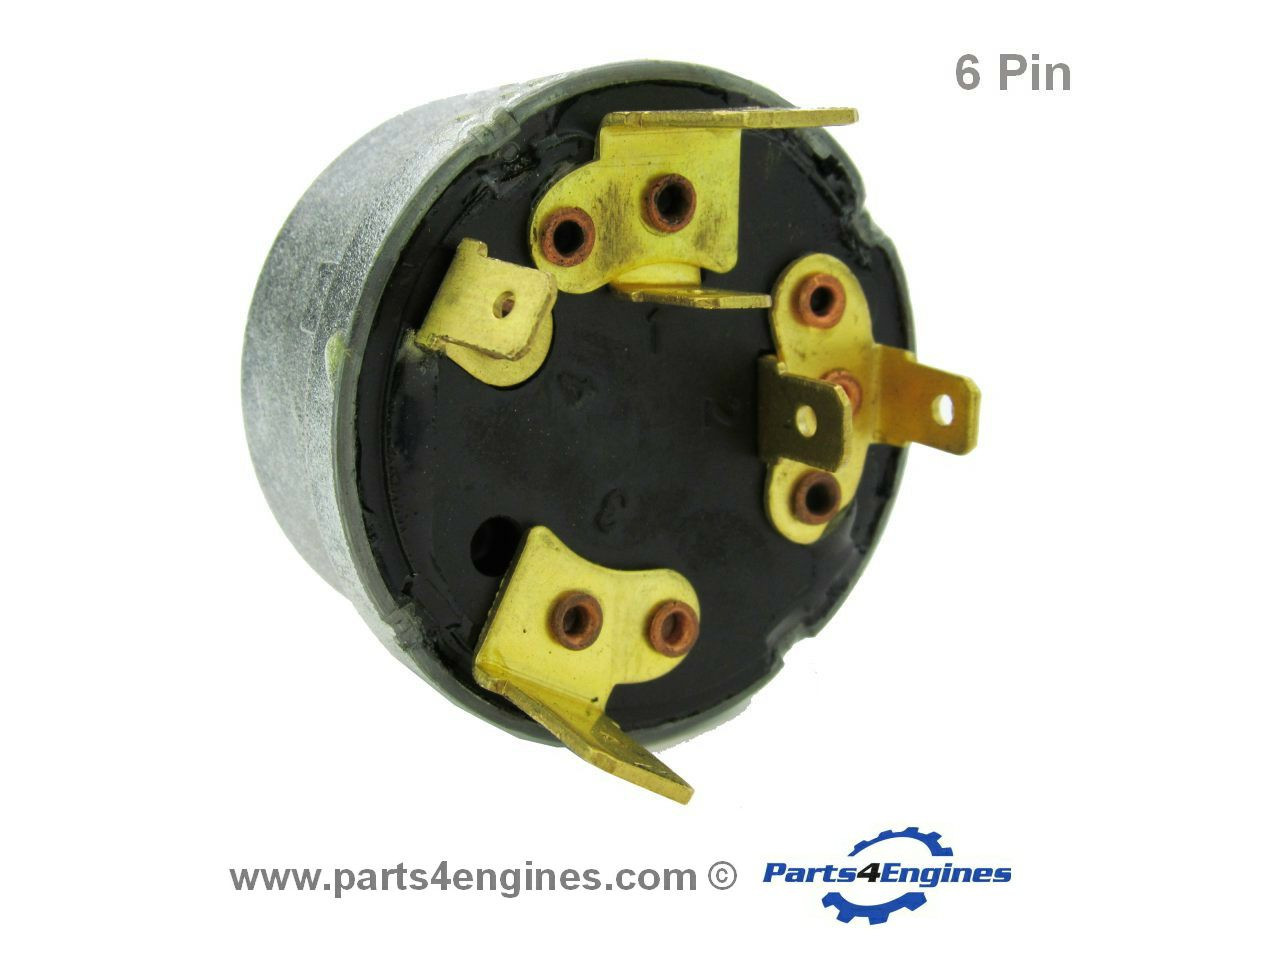 6 pin switch - Perkins 4.154 ignition switch from parts4engines.com